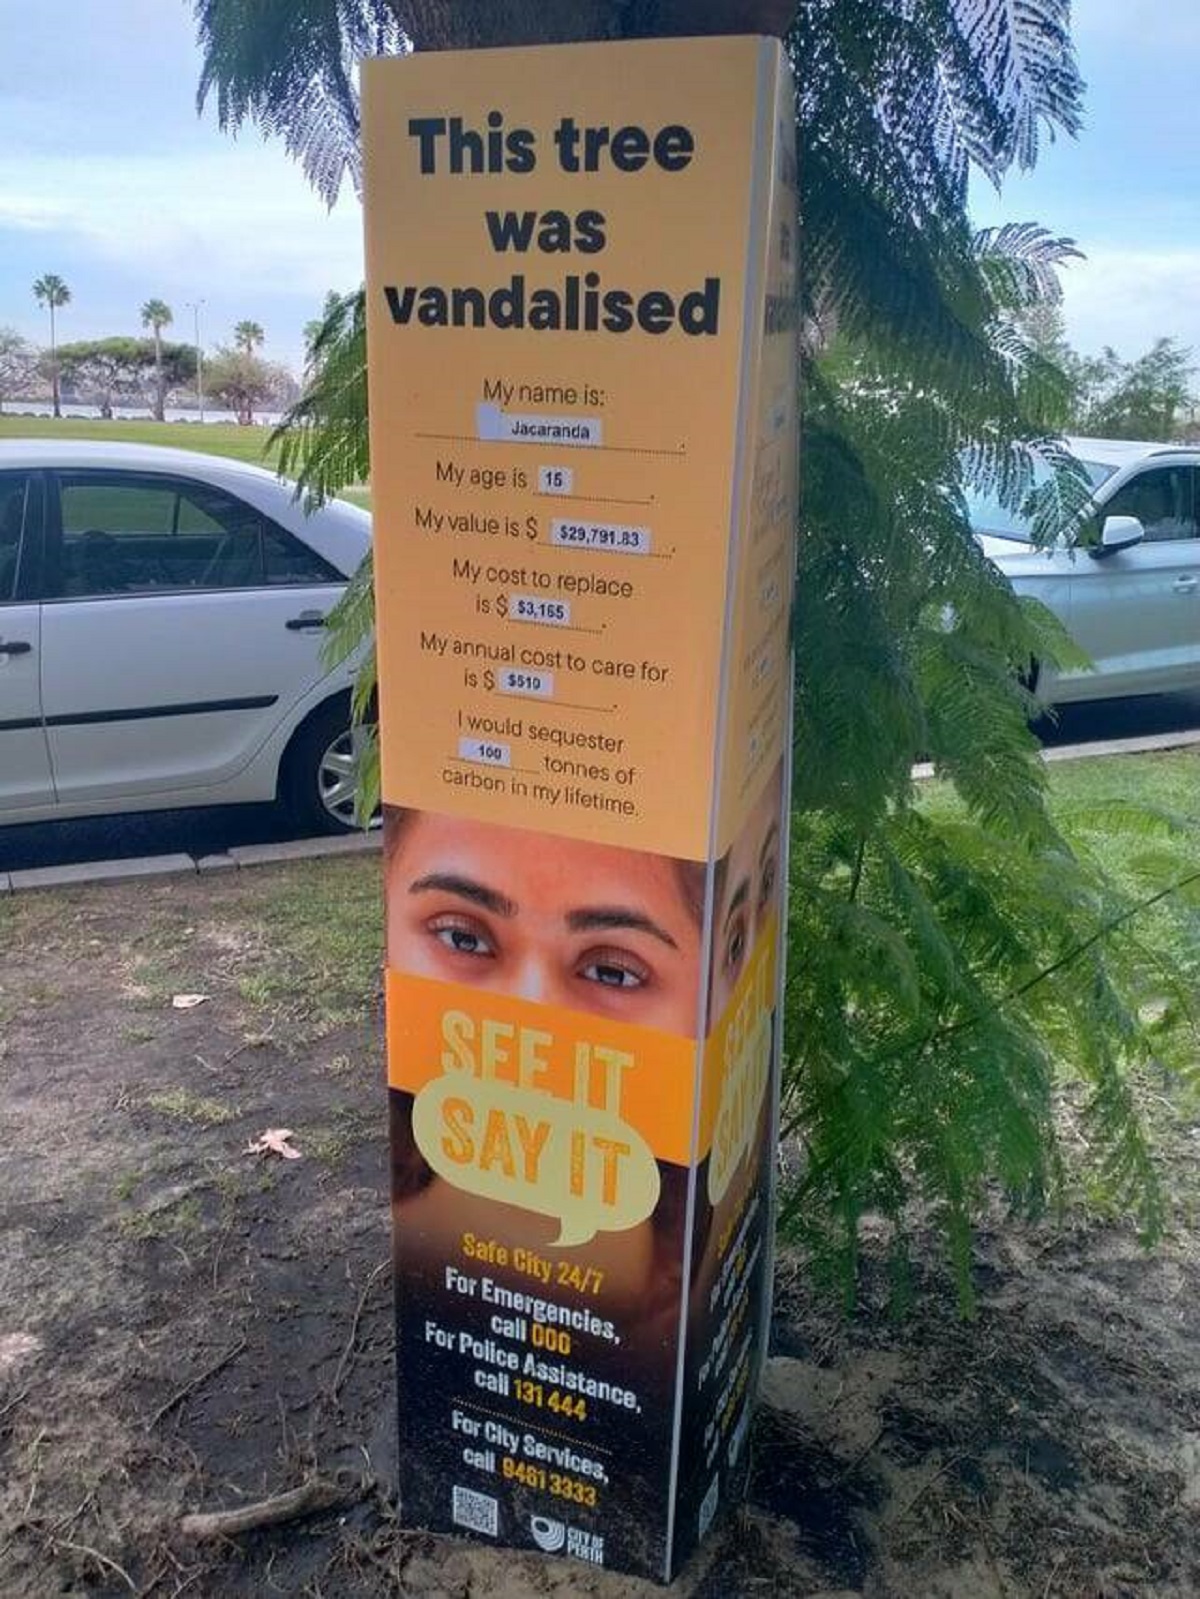 "In Perth, they show how much money tree vandalism costs the community"